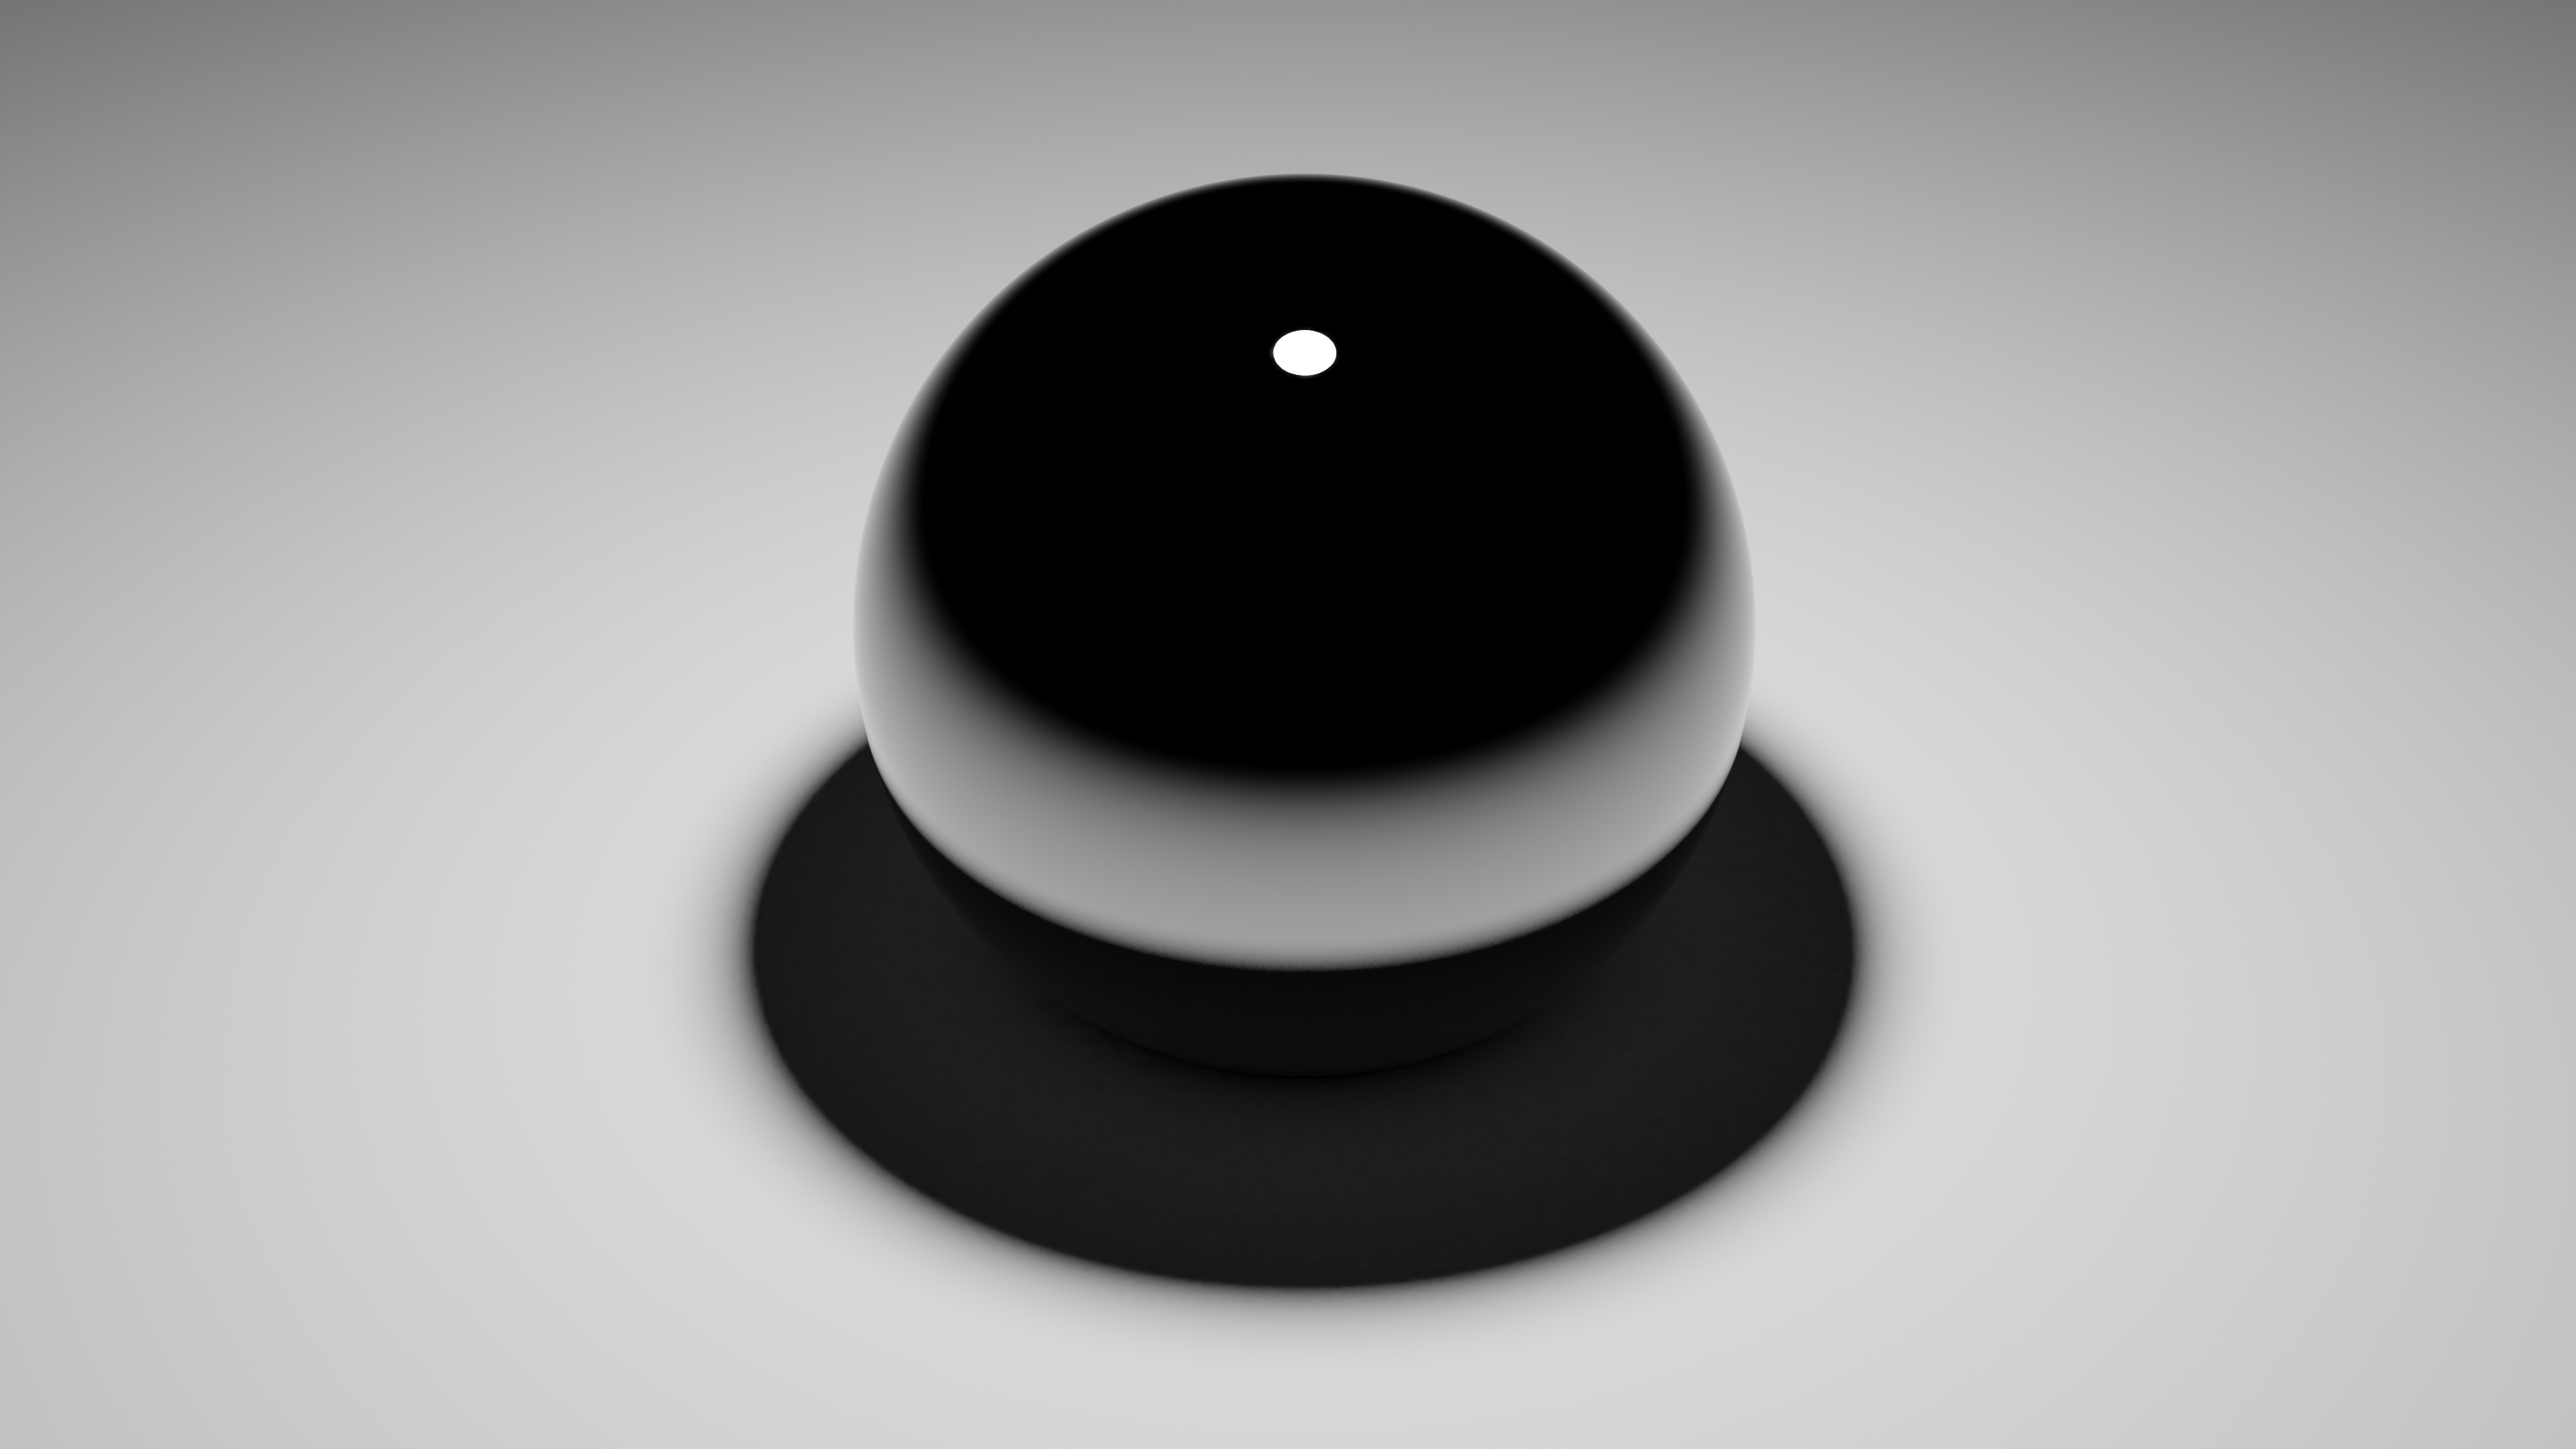 General 3840x2160 3D Abstract minimalism ball